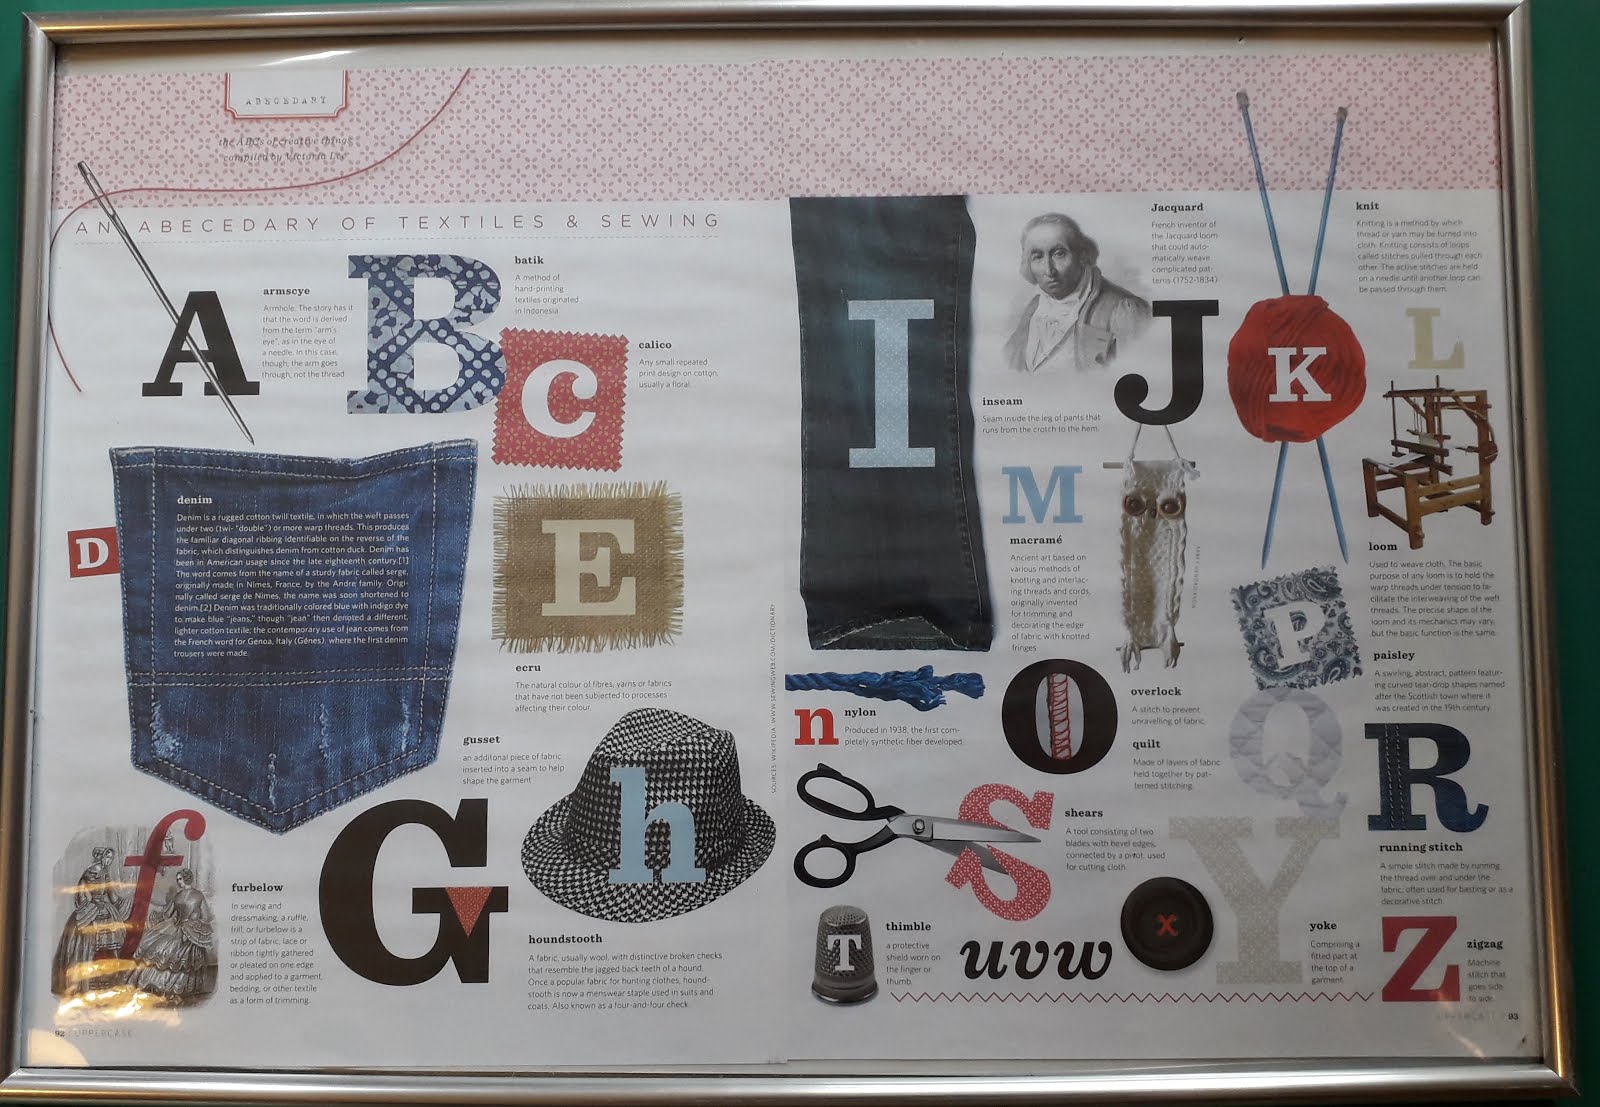 'Uppercase's' ABC of textile things involved in my craft